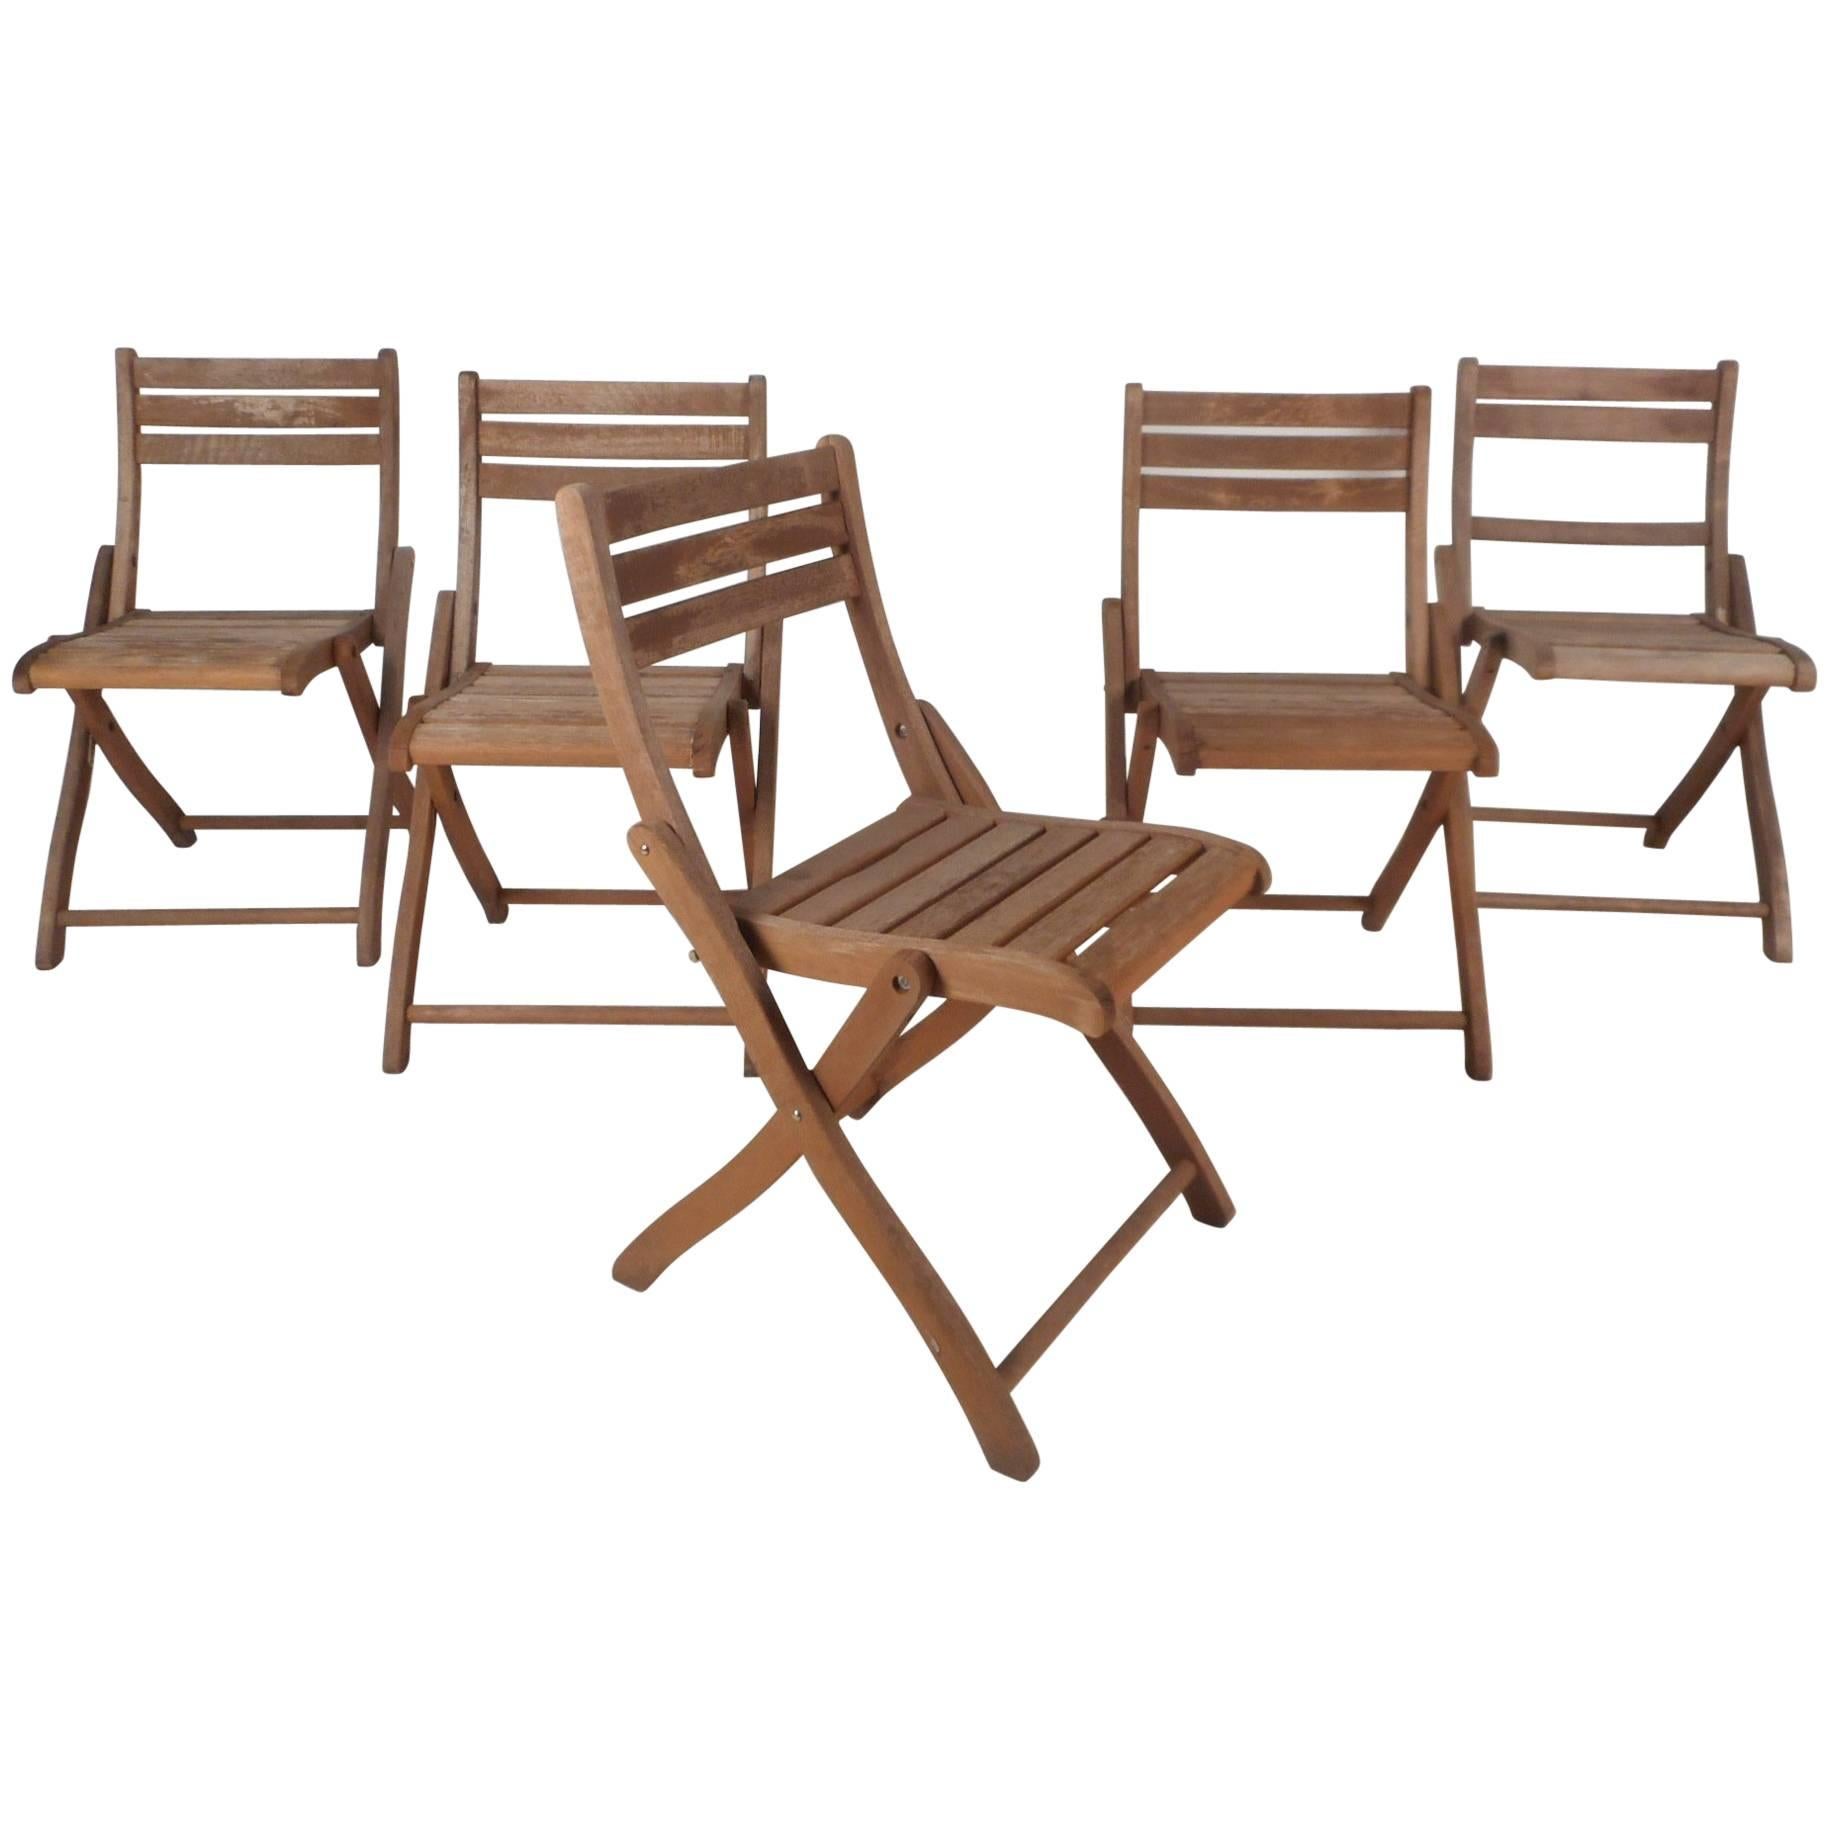 Set of Five Mid-Century Modern Wood Folding Chairs For Sale